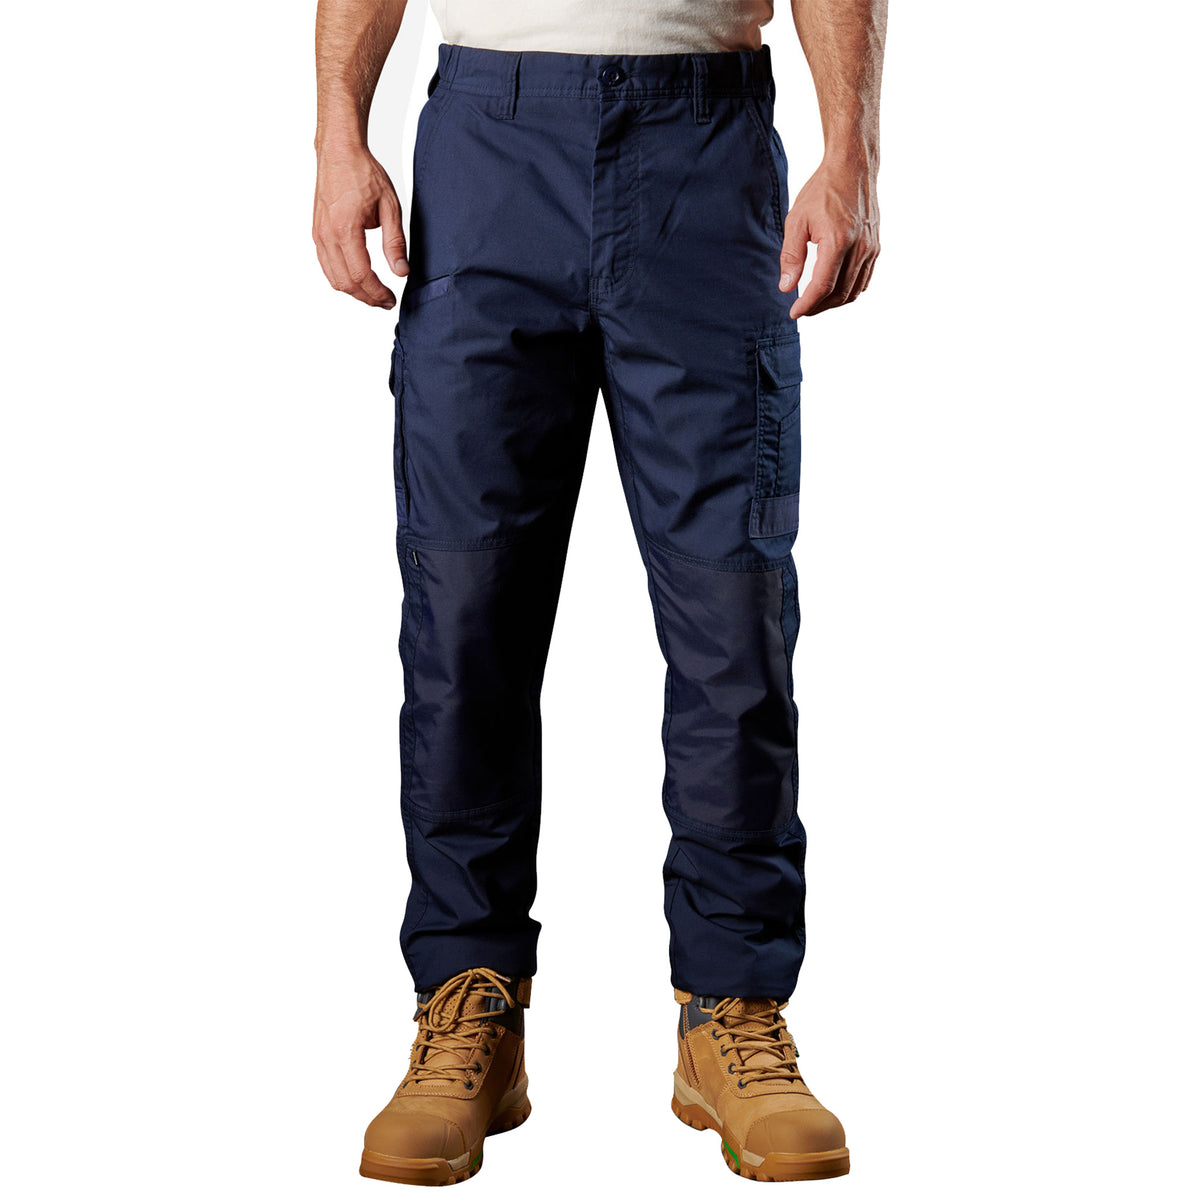 TuffStuff - Extreme Work Trousers - 28” Waist - Black - Cargo Trousers - Work  Trousers For Men - Triple Stitched Seams - Detachable Holster Pocket -  Features Knee Pad Pockets : Amazon.co.uk: Fashion